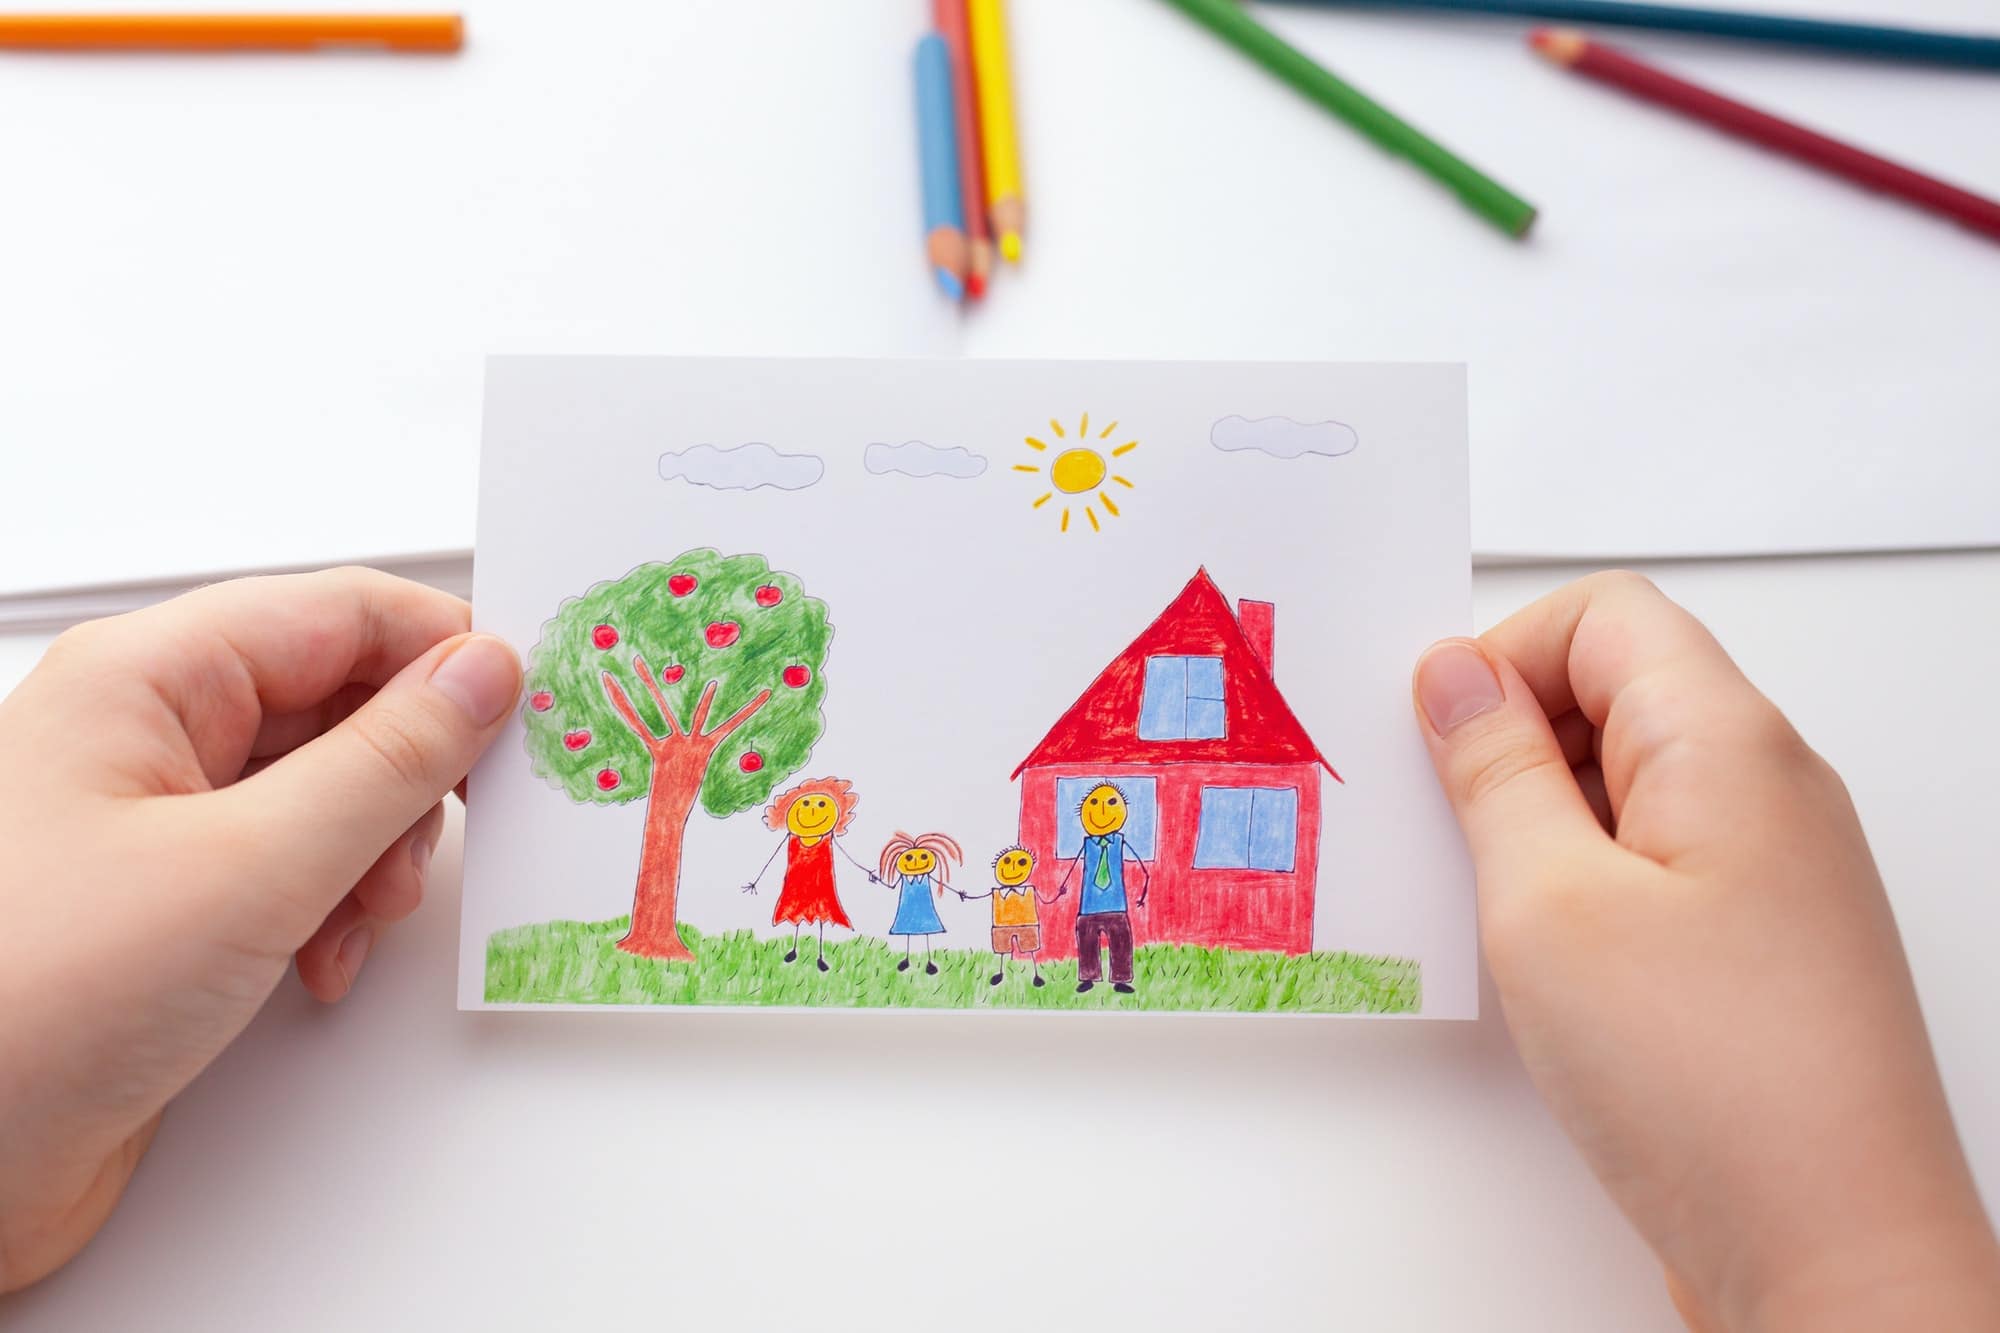 Child holding a drawing with a happy family and an apple tree and a house